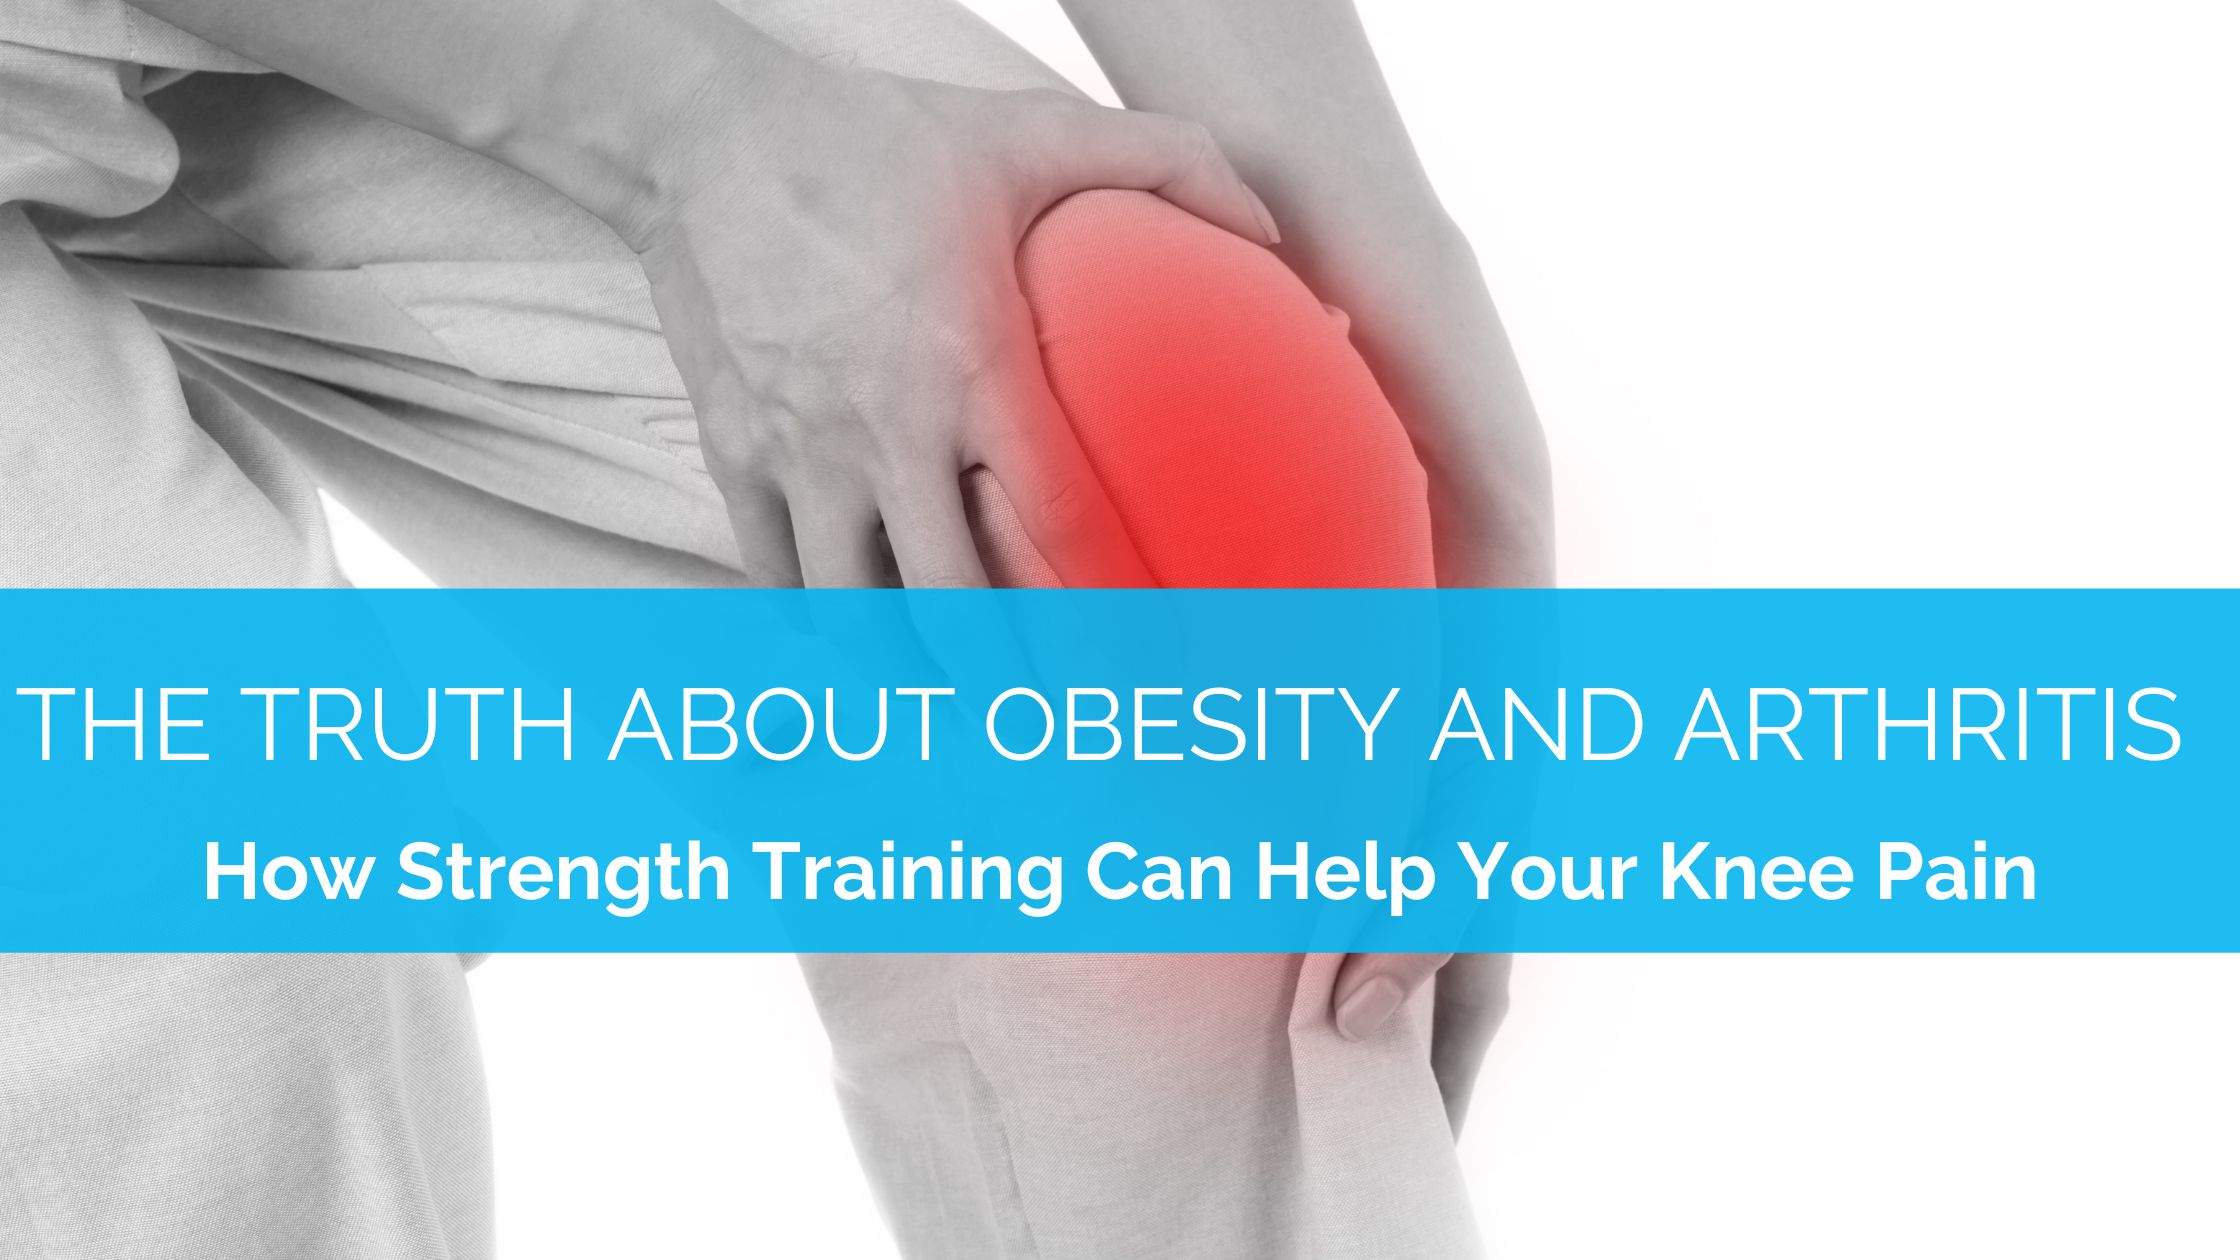 The truth about obesity and arthritis: how strength training can help.